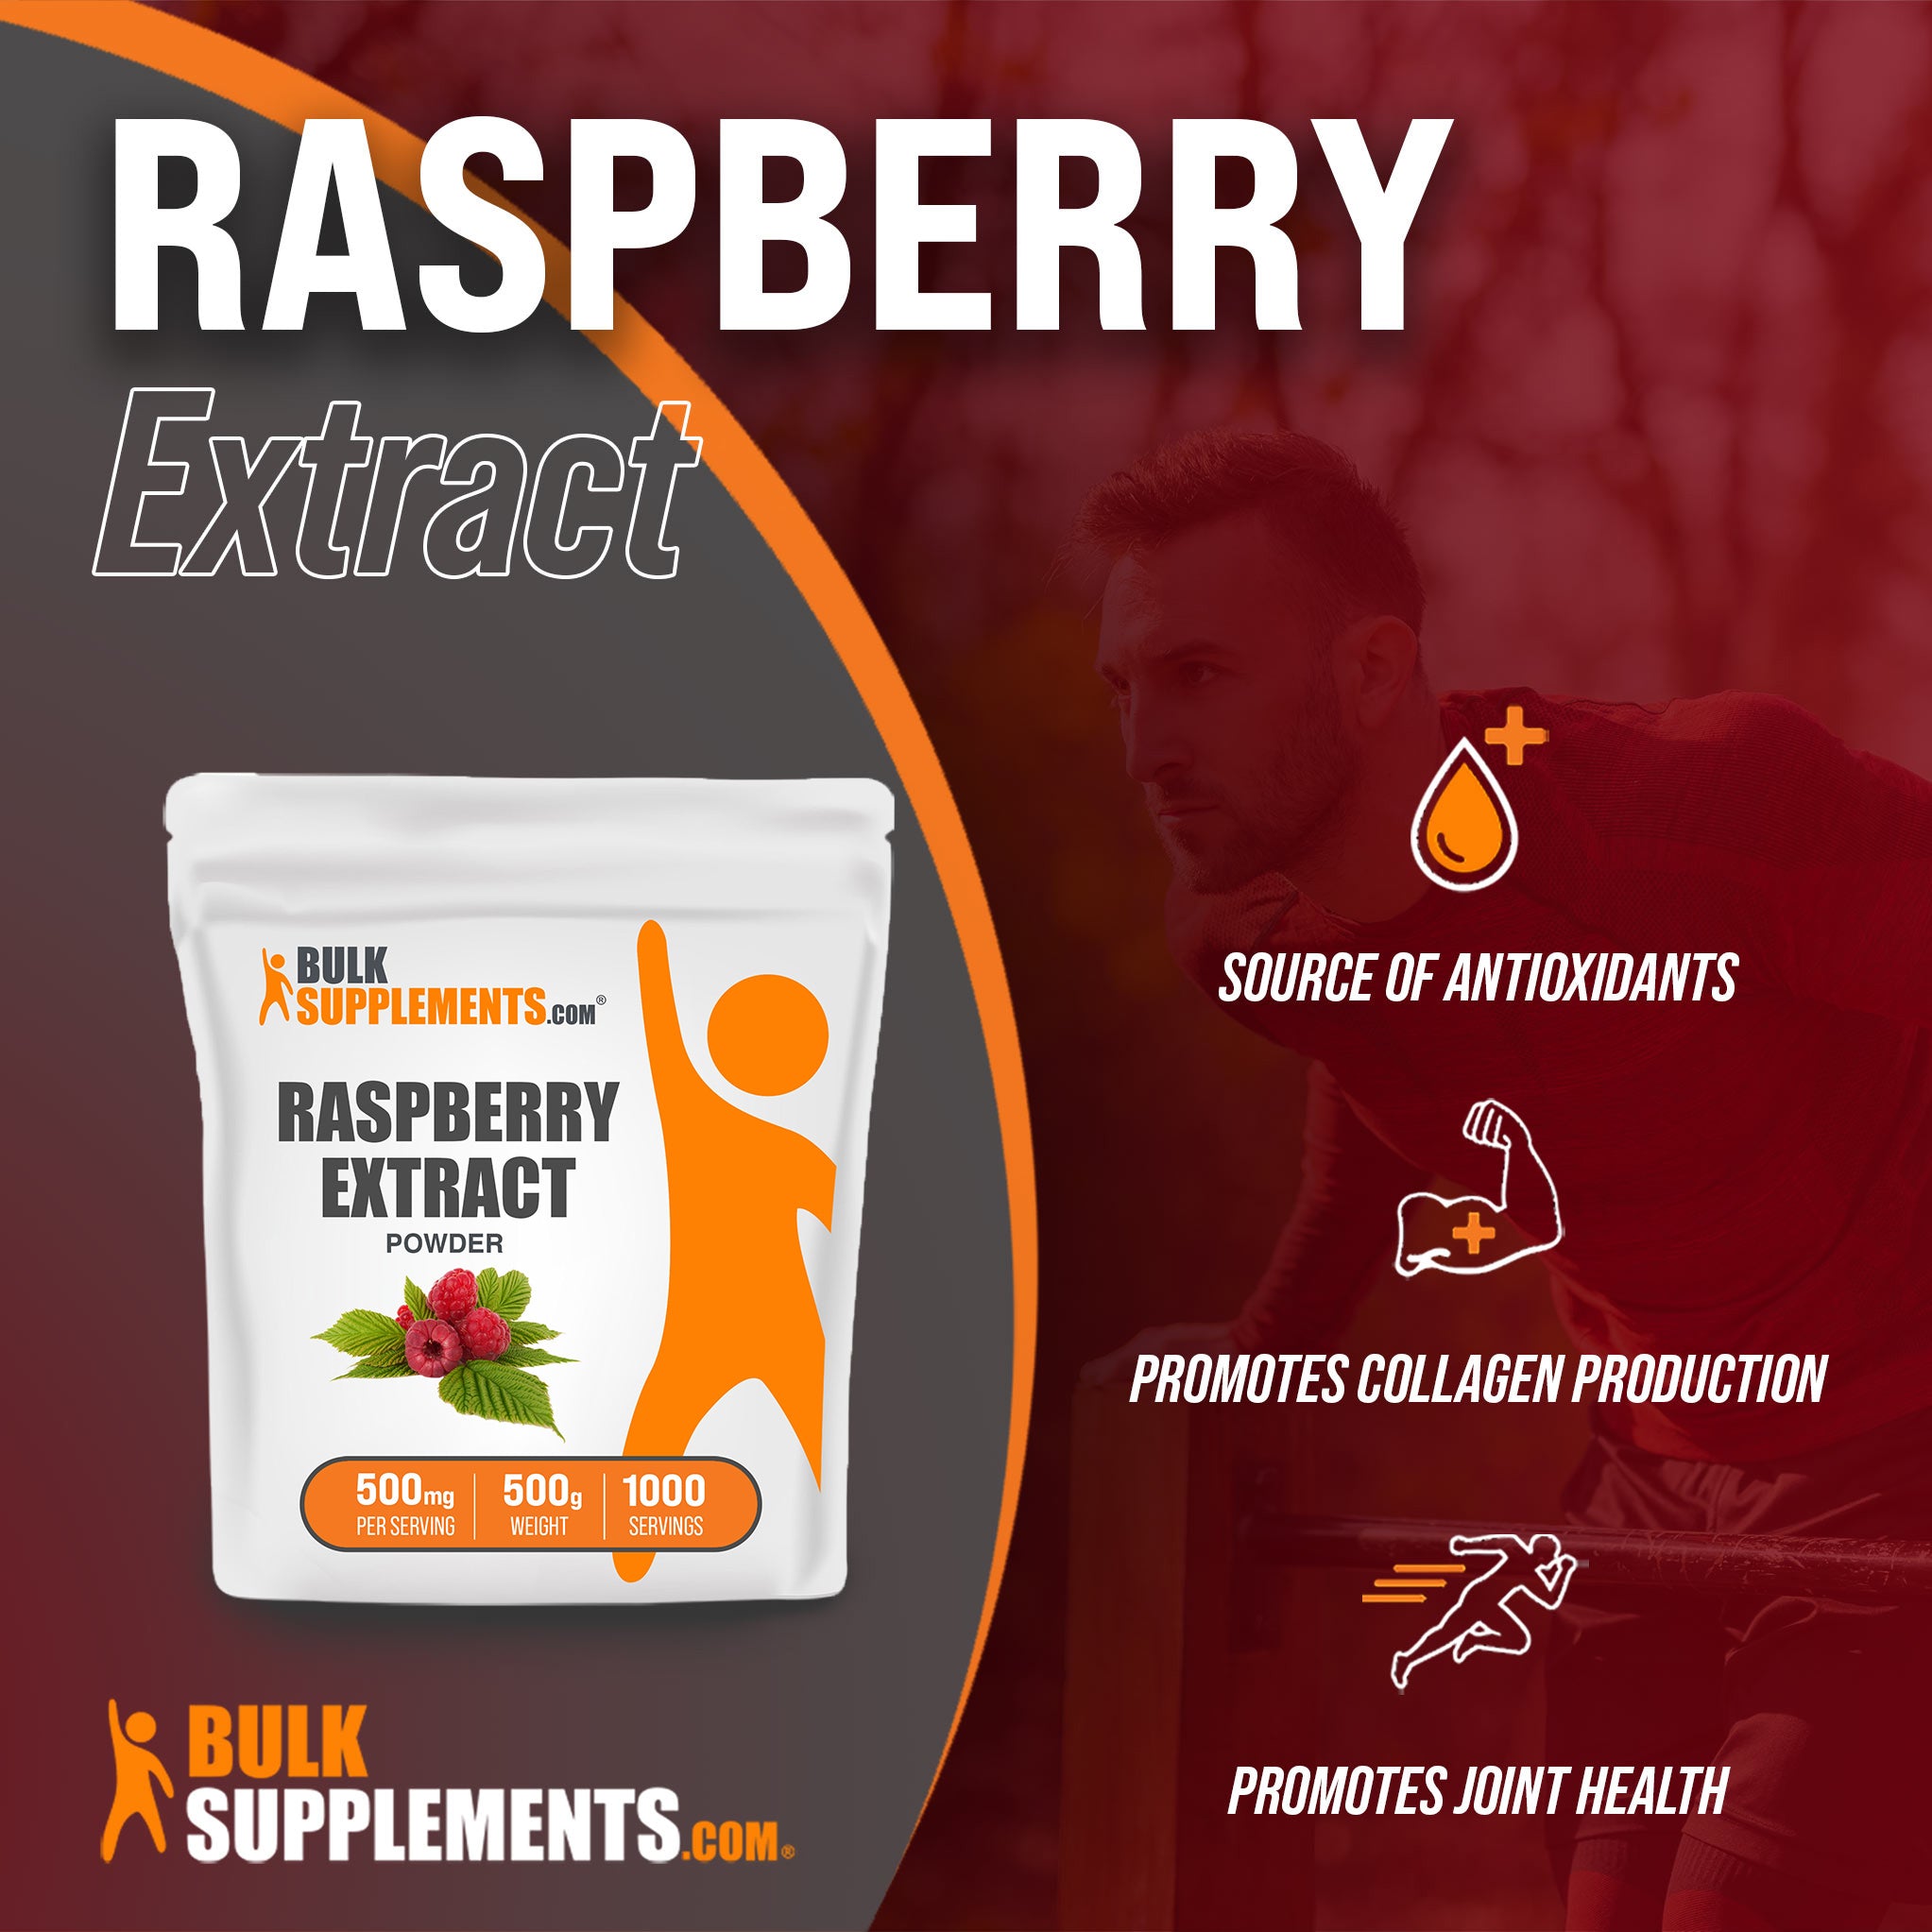 Benefits of Raspberry Extract: Source of Antioxidants, promotes collagen production, promotes joint health